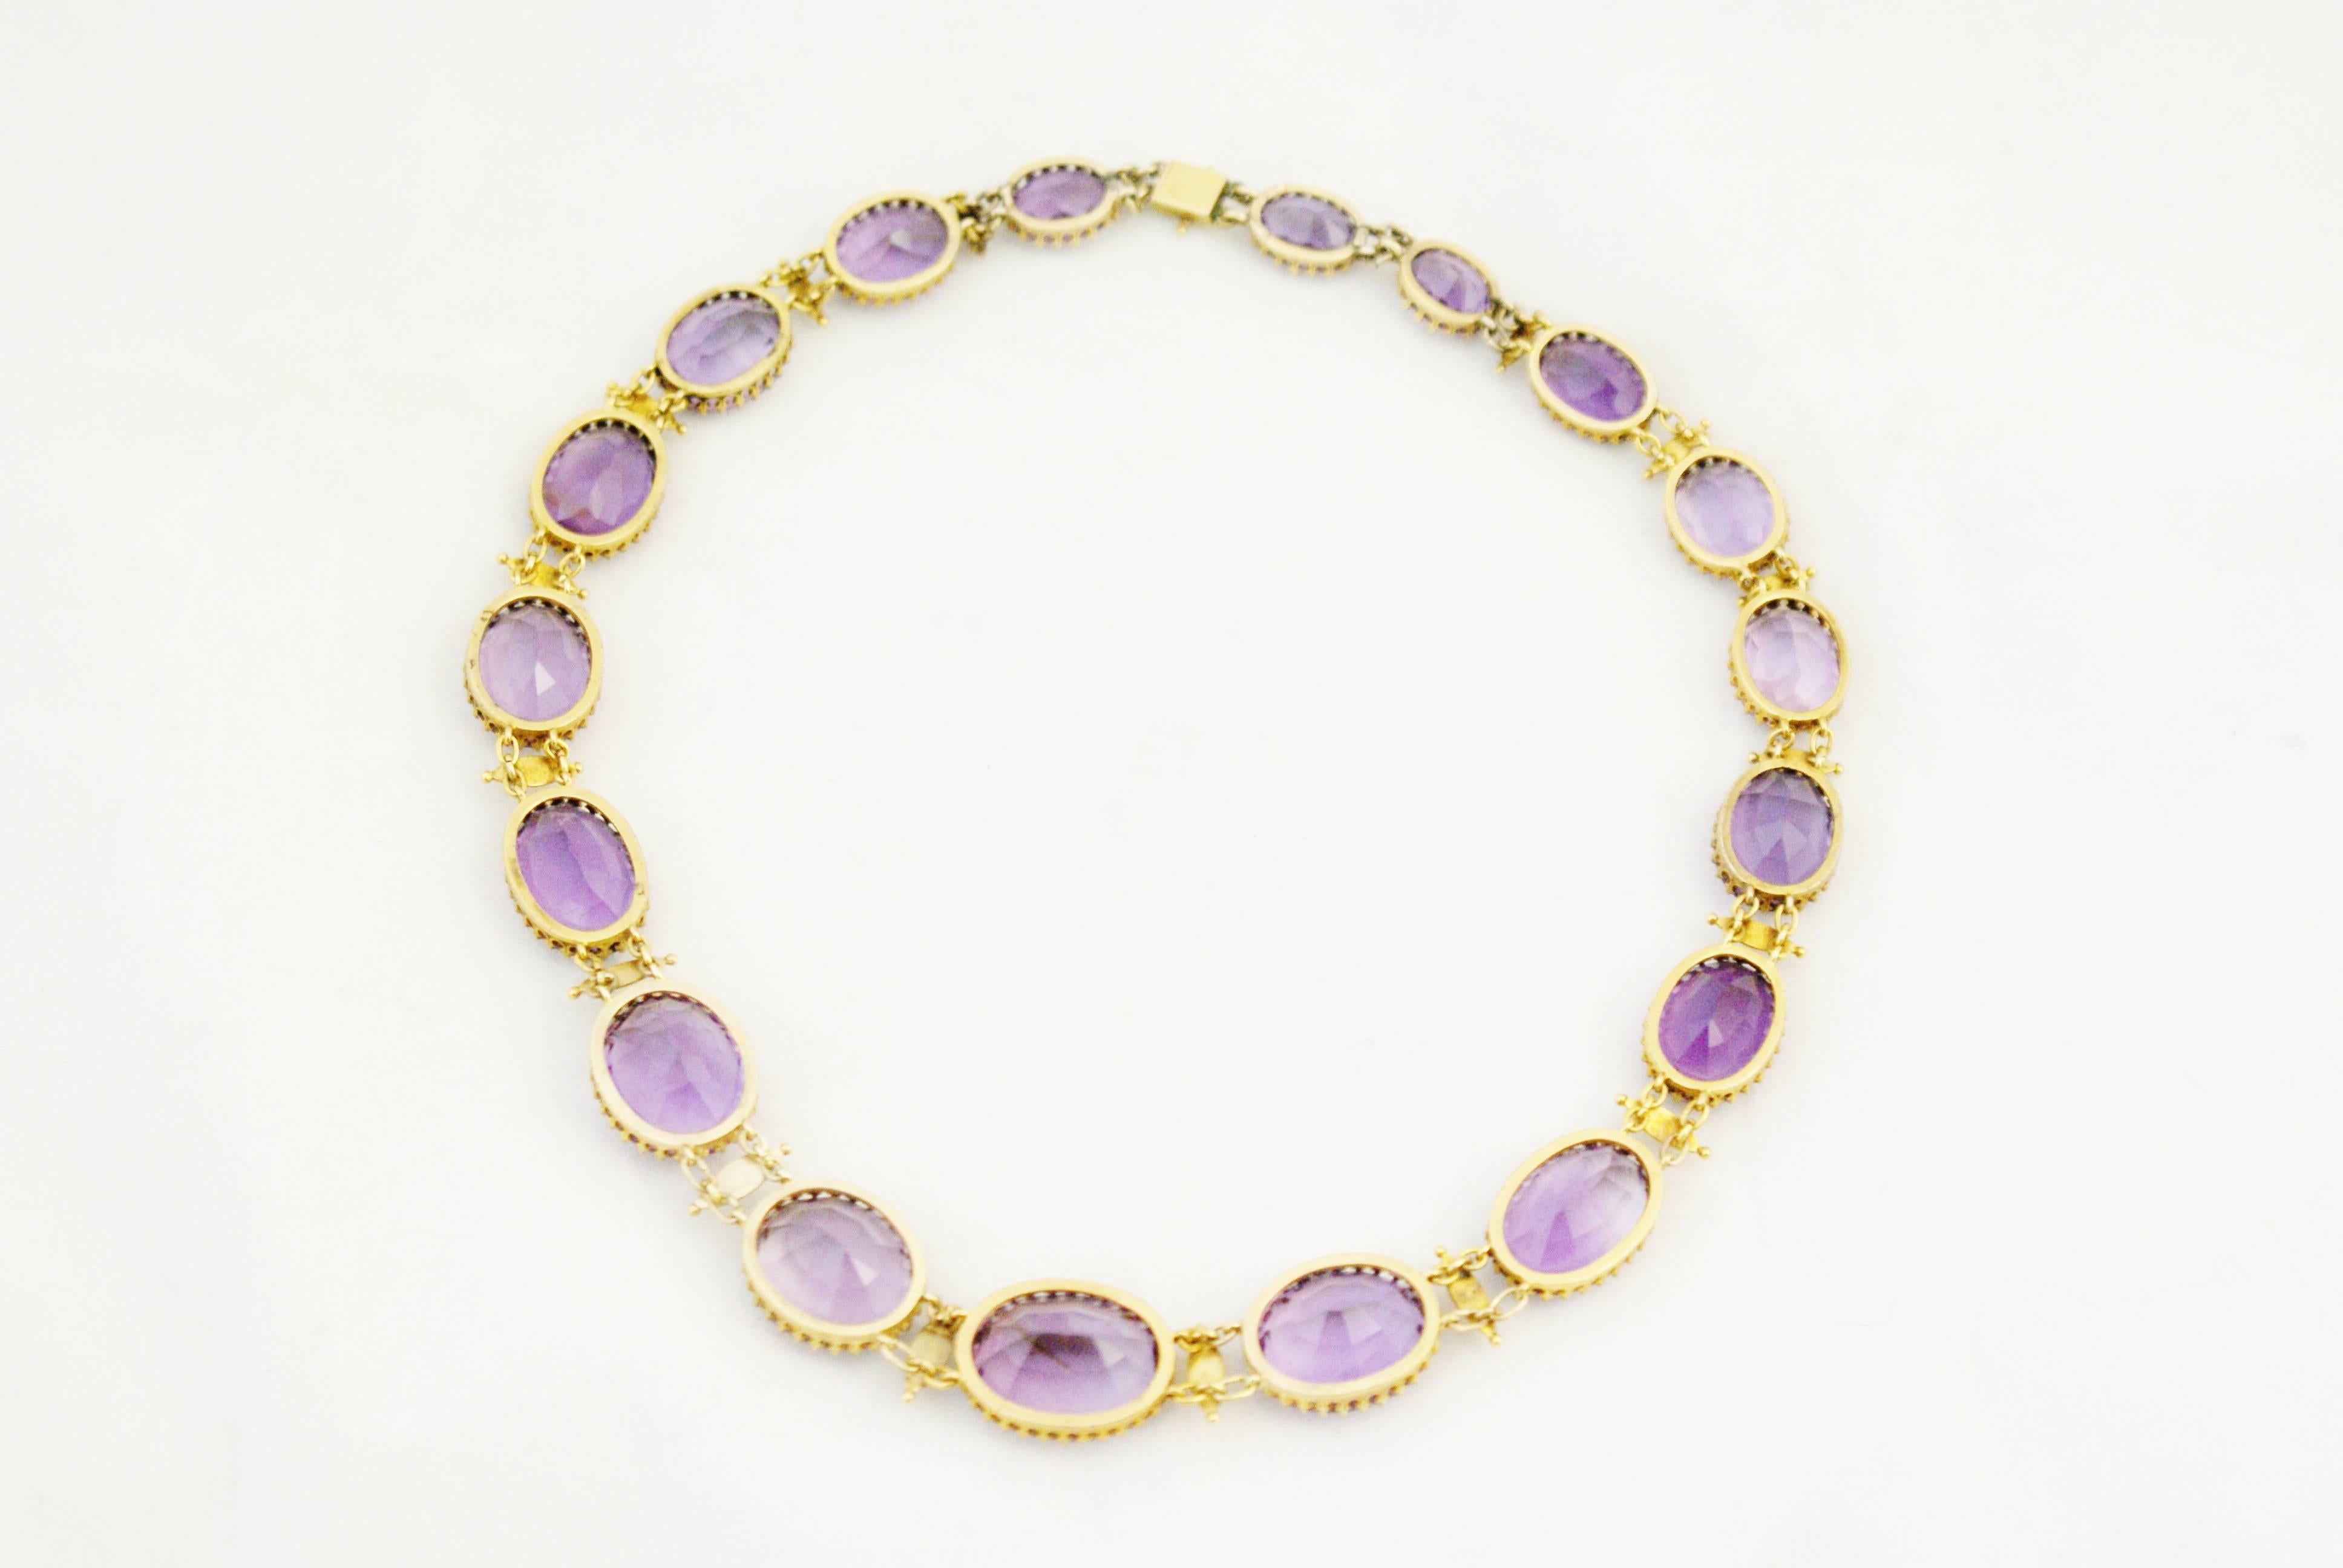 Oval Cut Victorian Etruscan Revival Amethyst and Gold Riviere Necklace For Sale